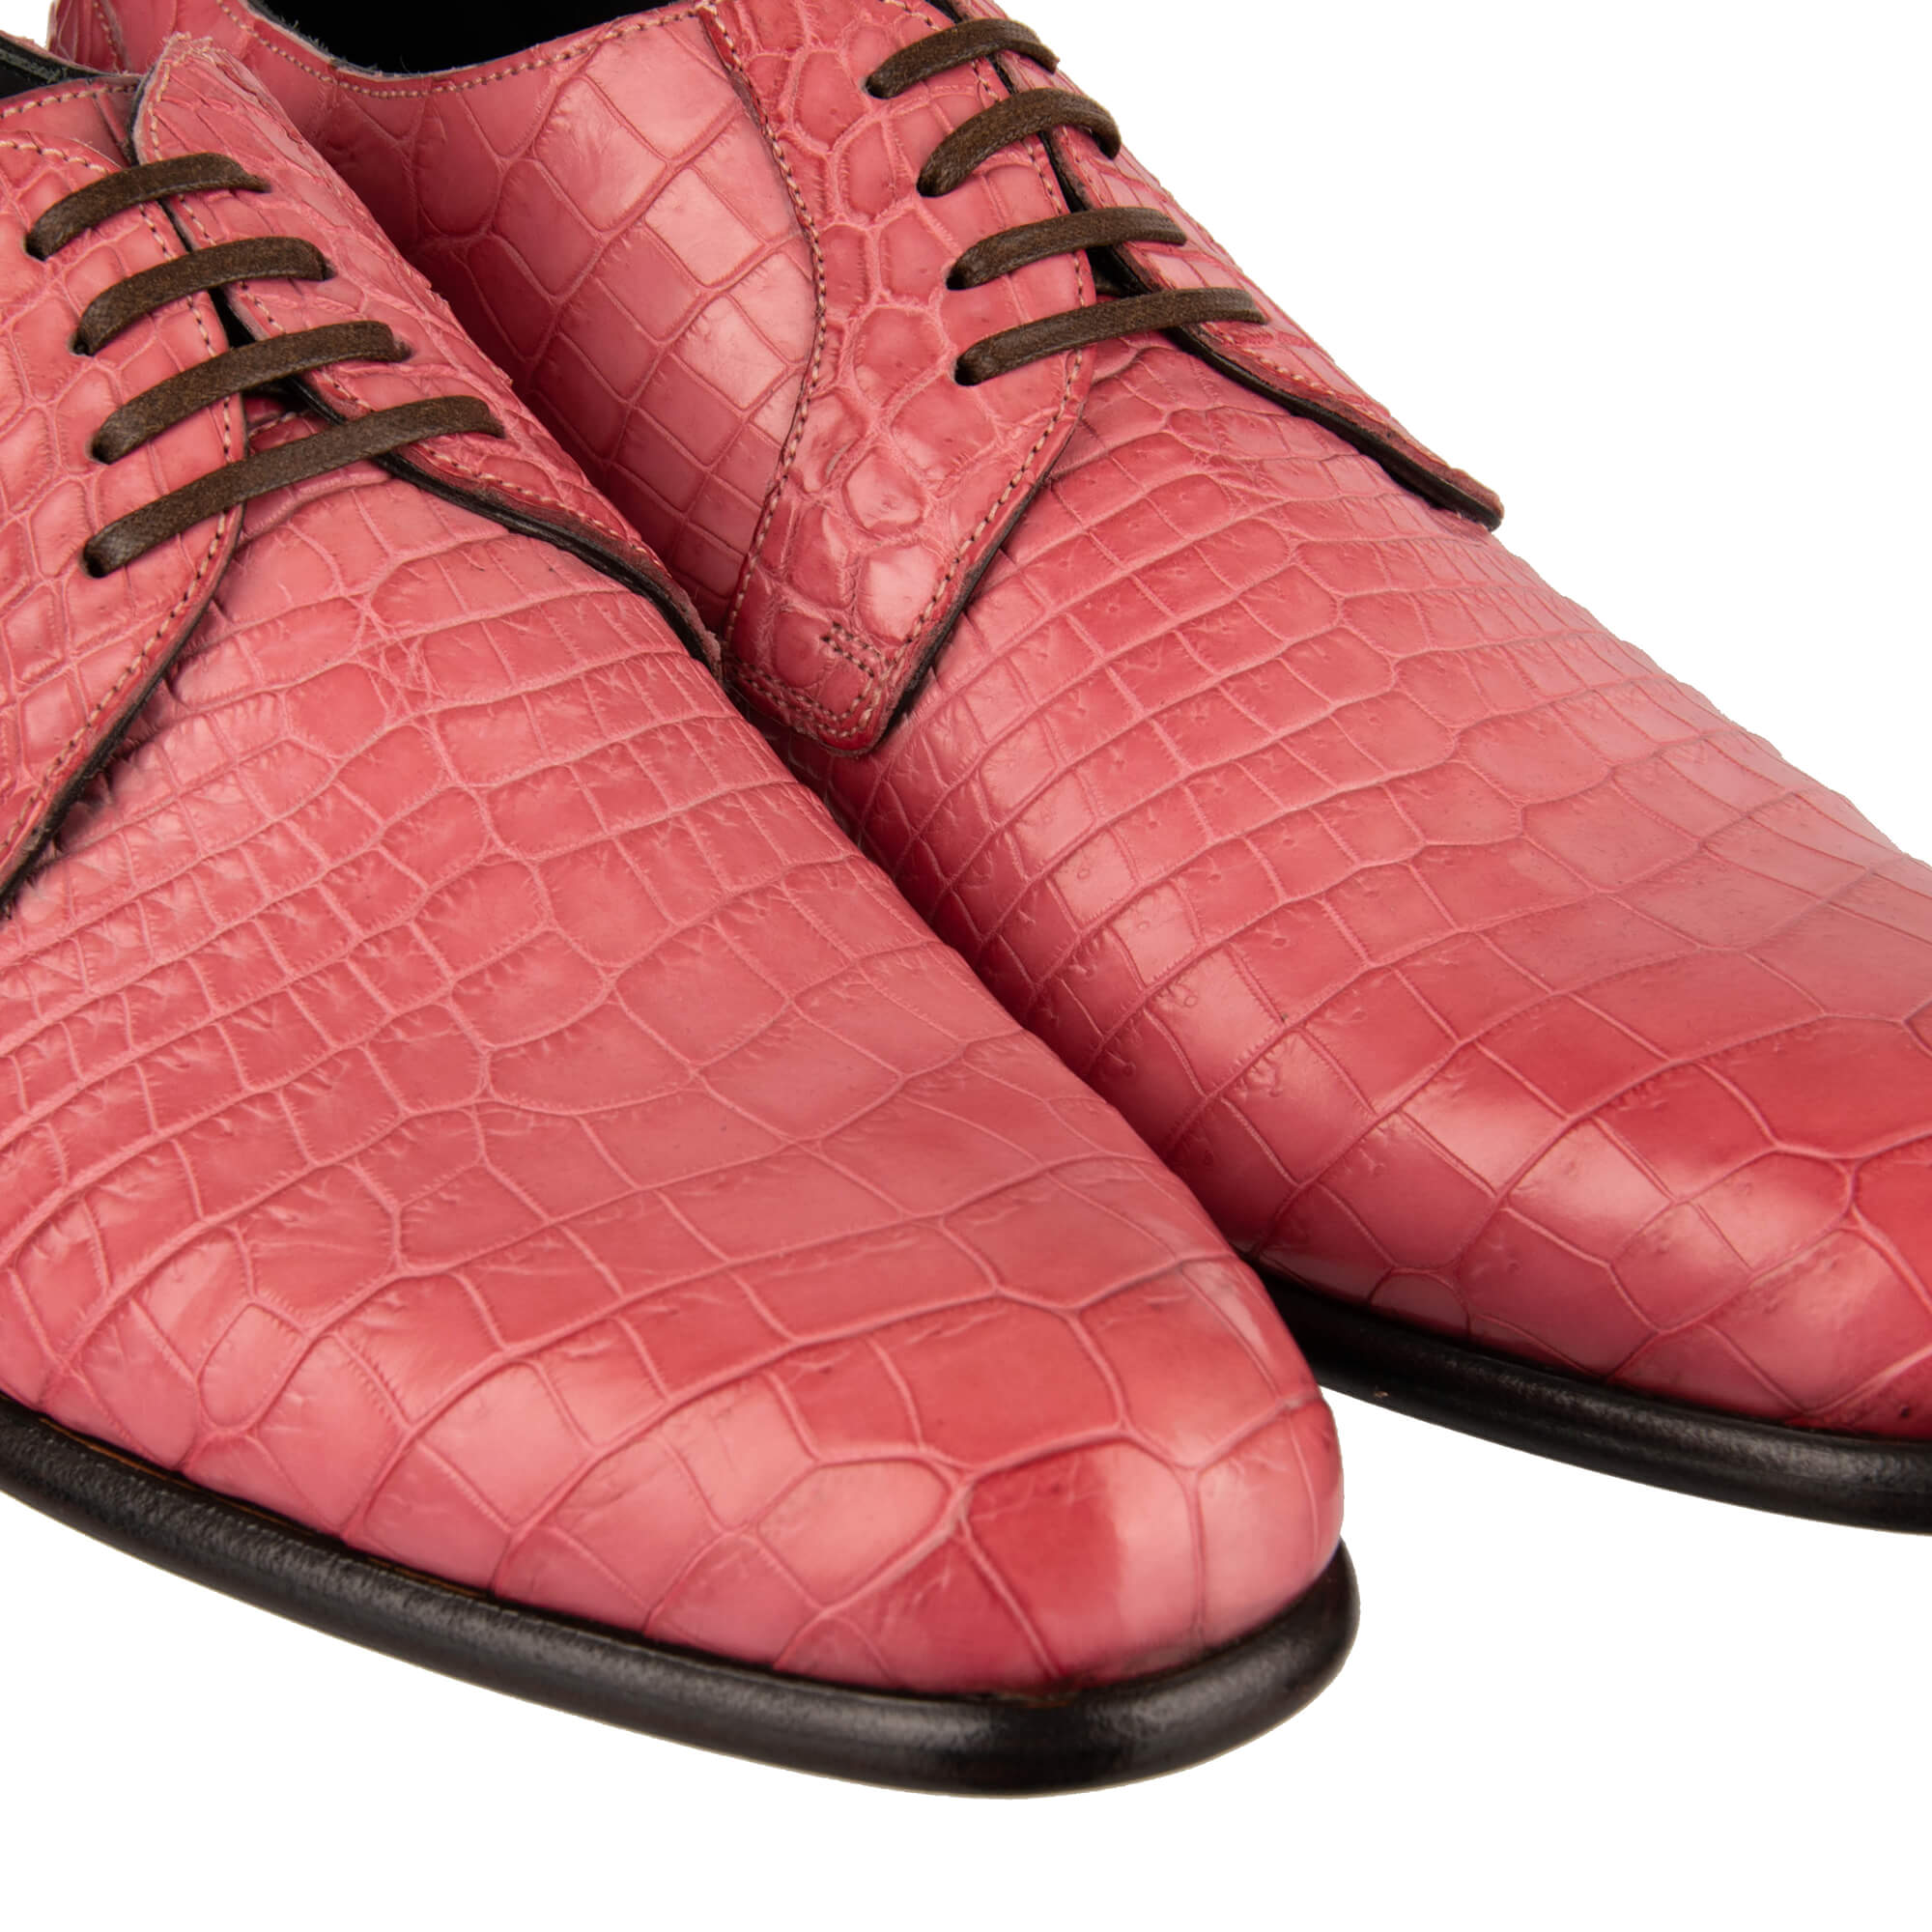 Dolce & Gabbana Crocodile Leather Derby Shoes SIENA Pink | FASHION ROOMS